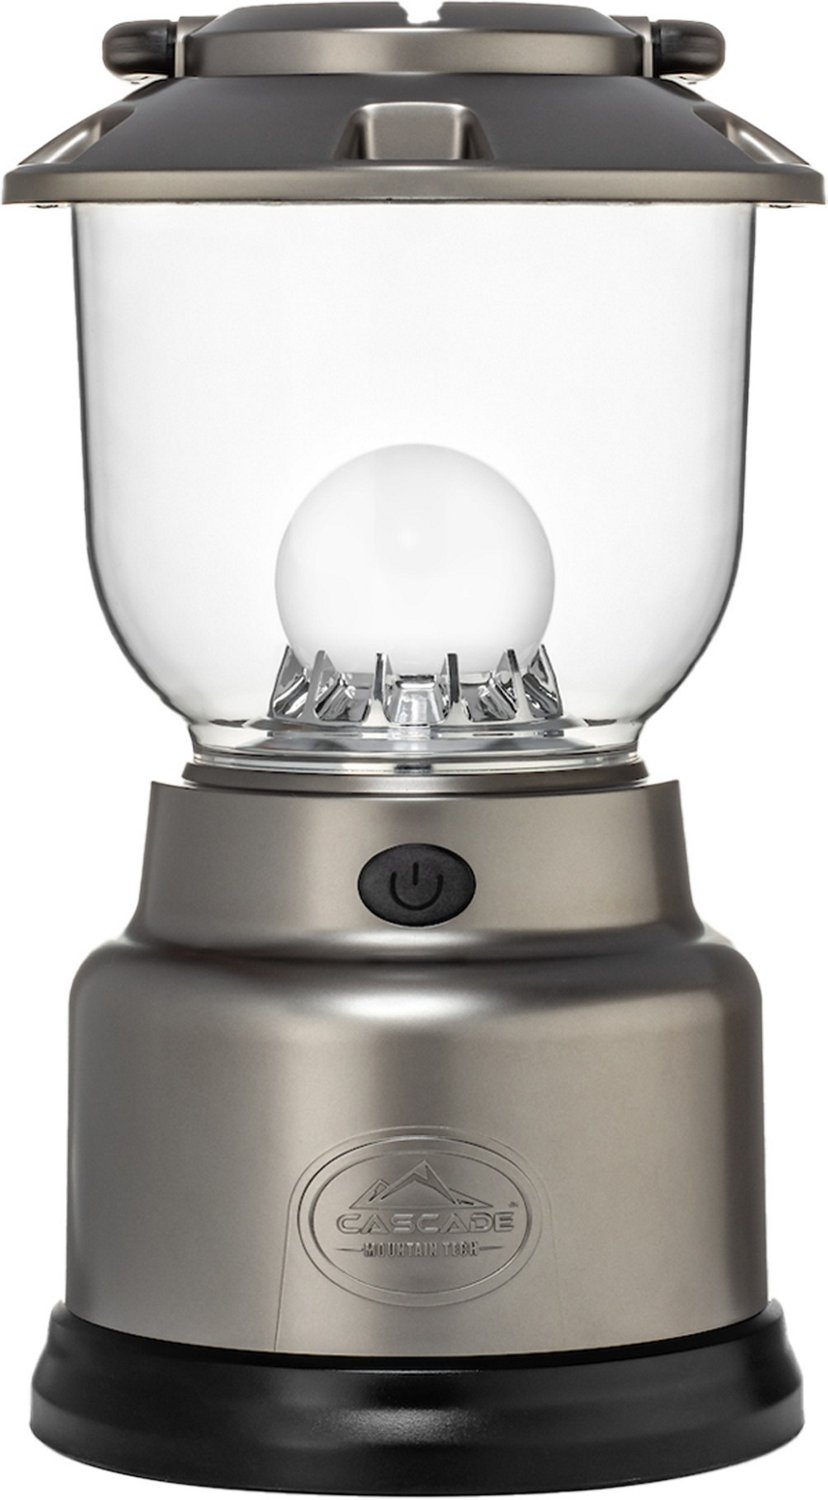 Cascade Mountain Tech IPX4 Water-Resistant LED Lantern with